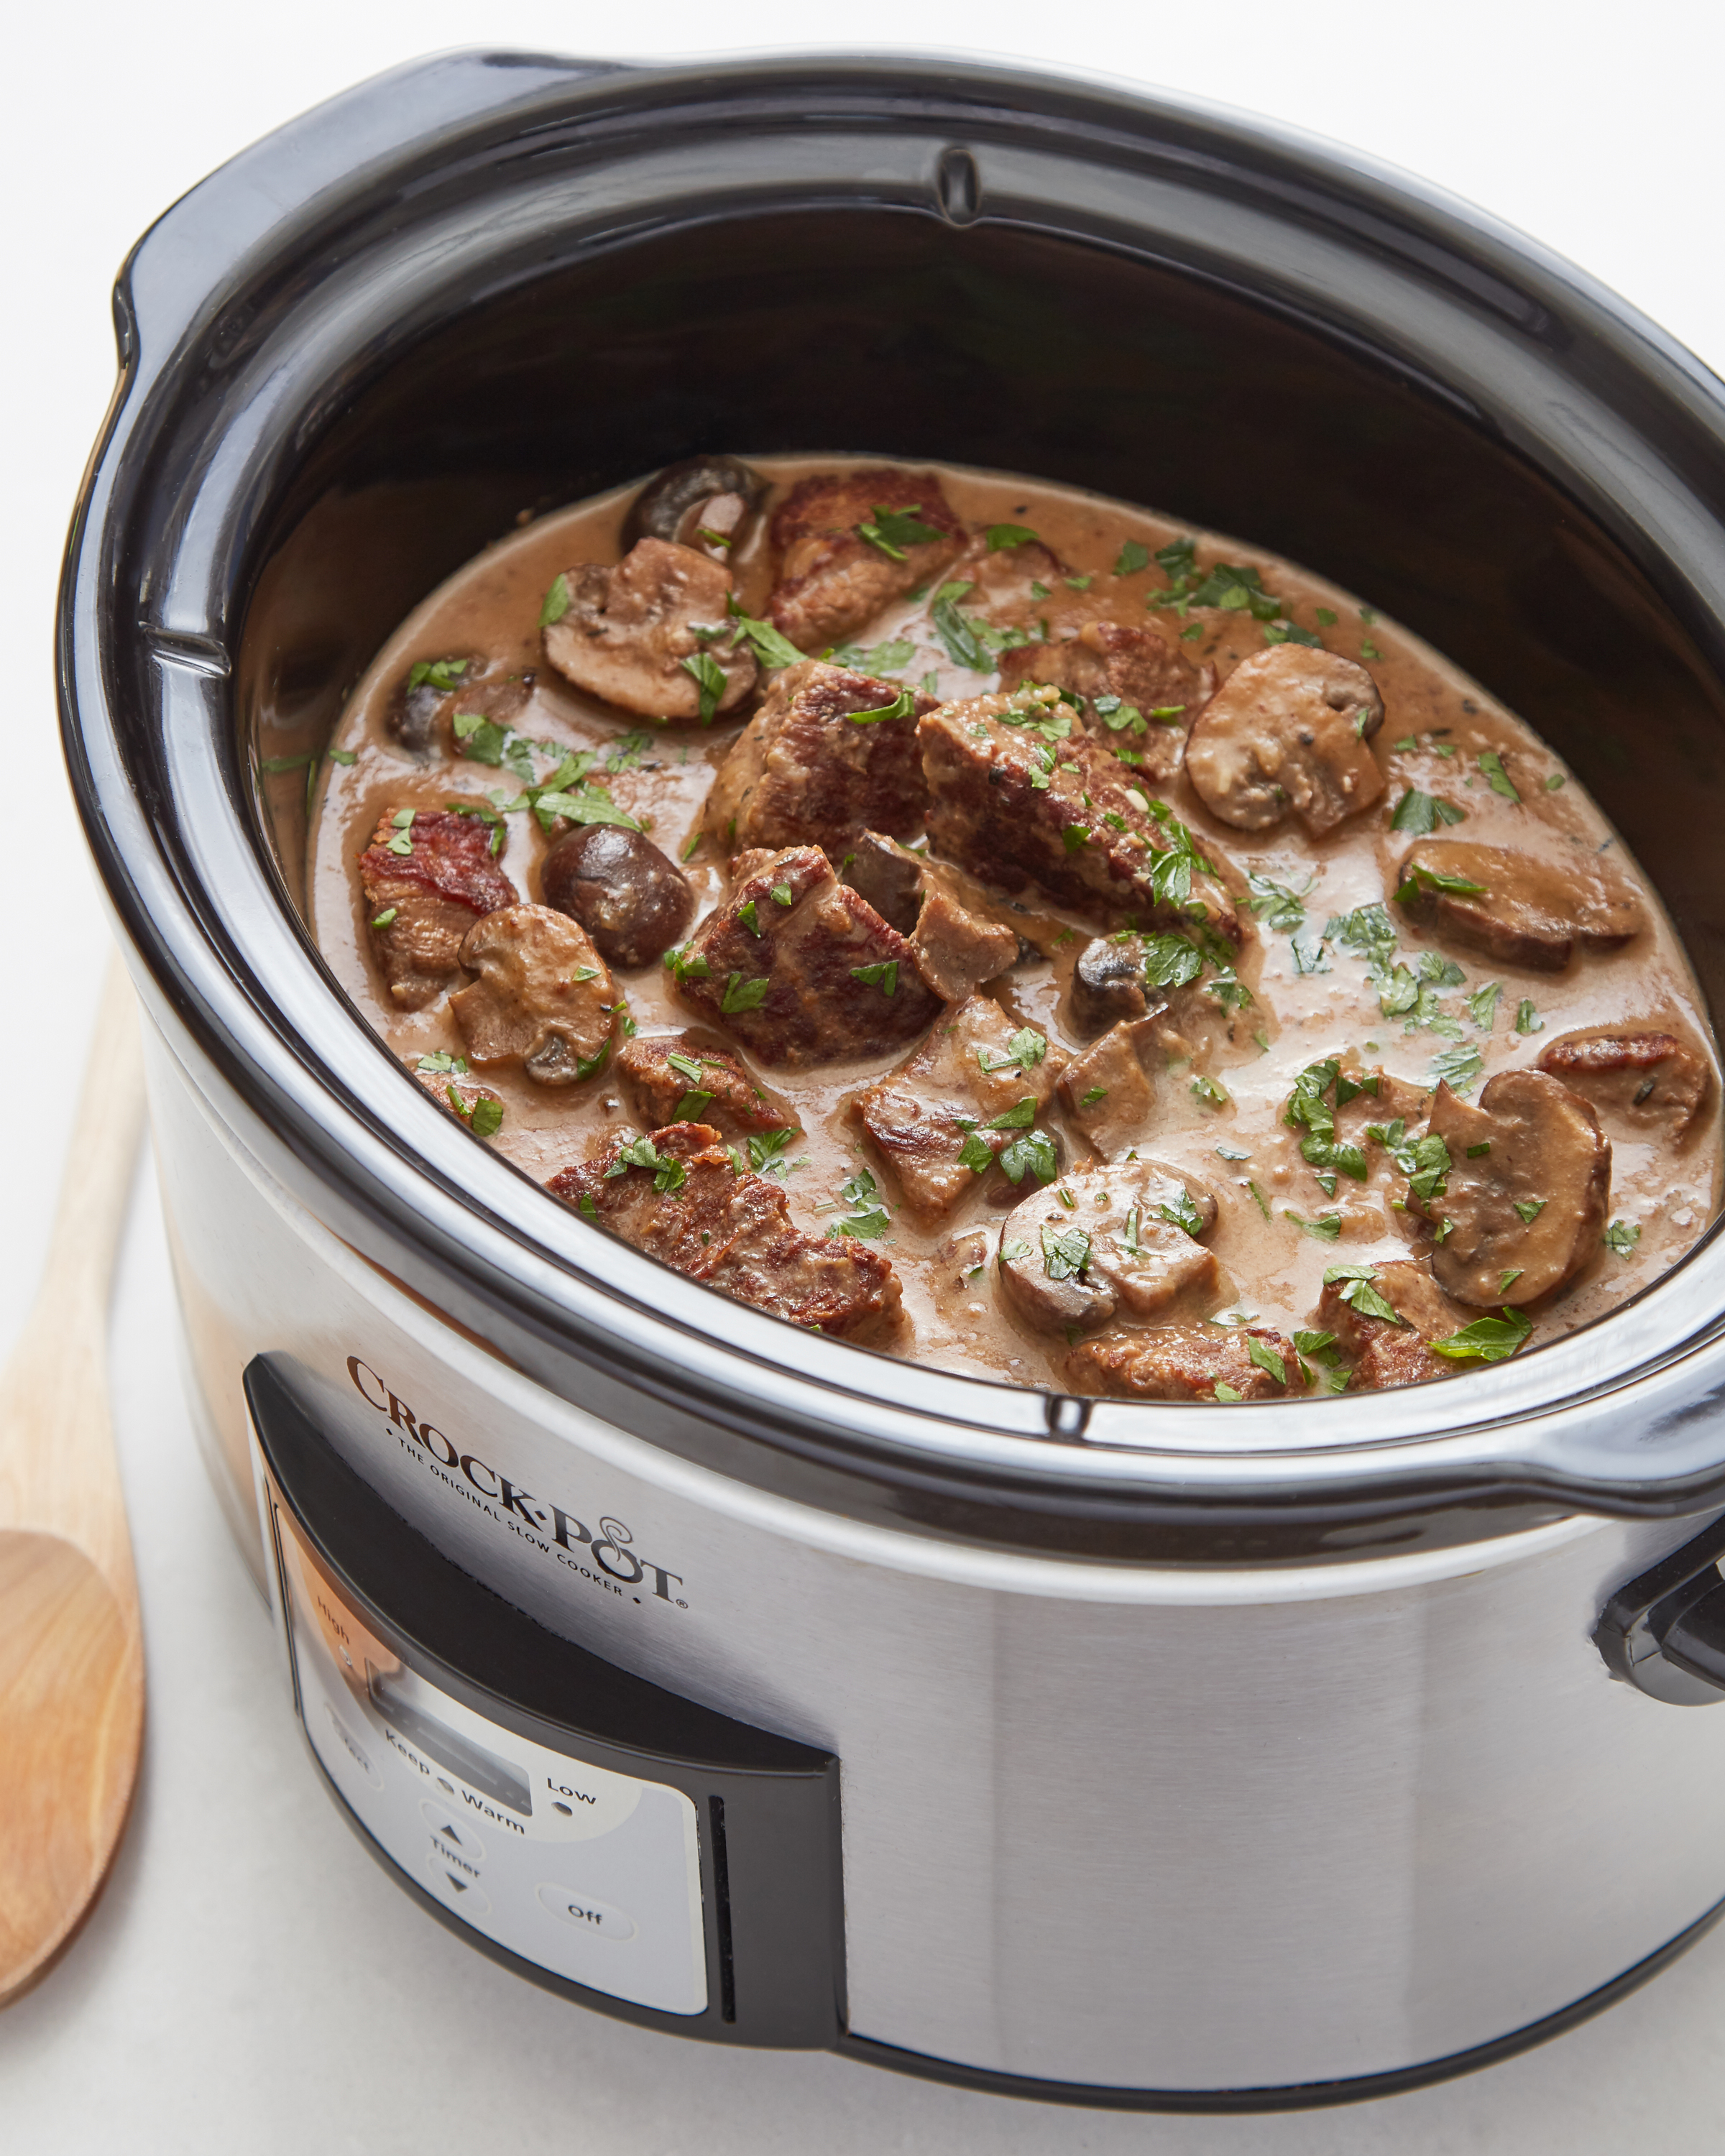 Cooking Tips for Crock Pot and Slow Cooker